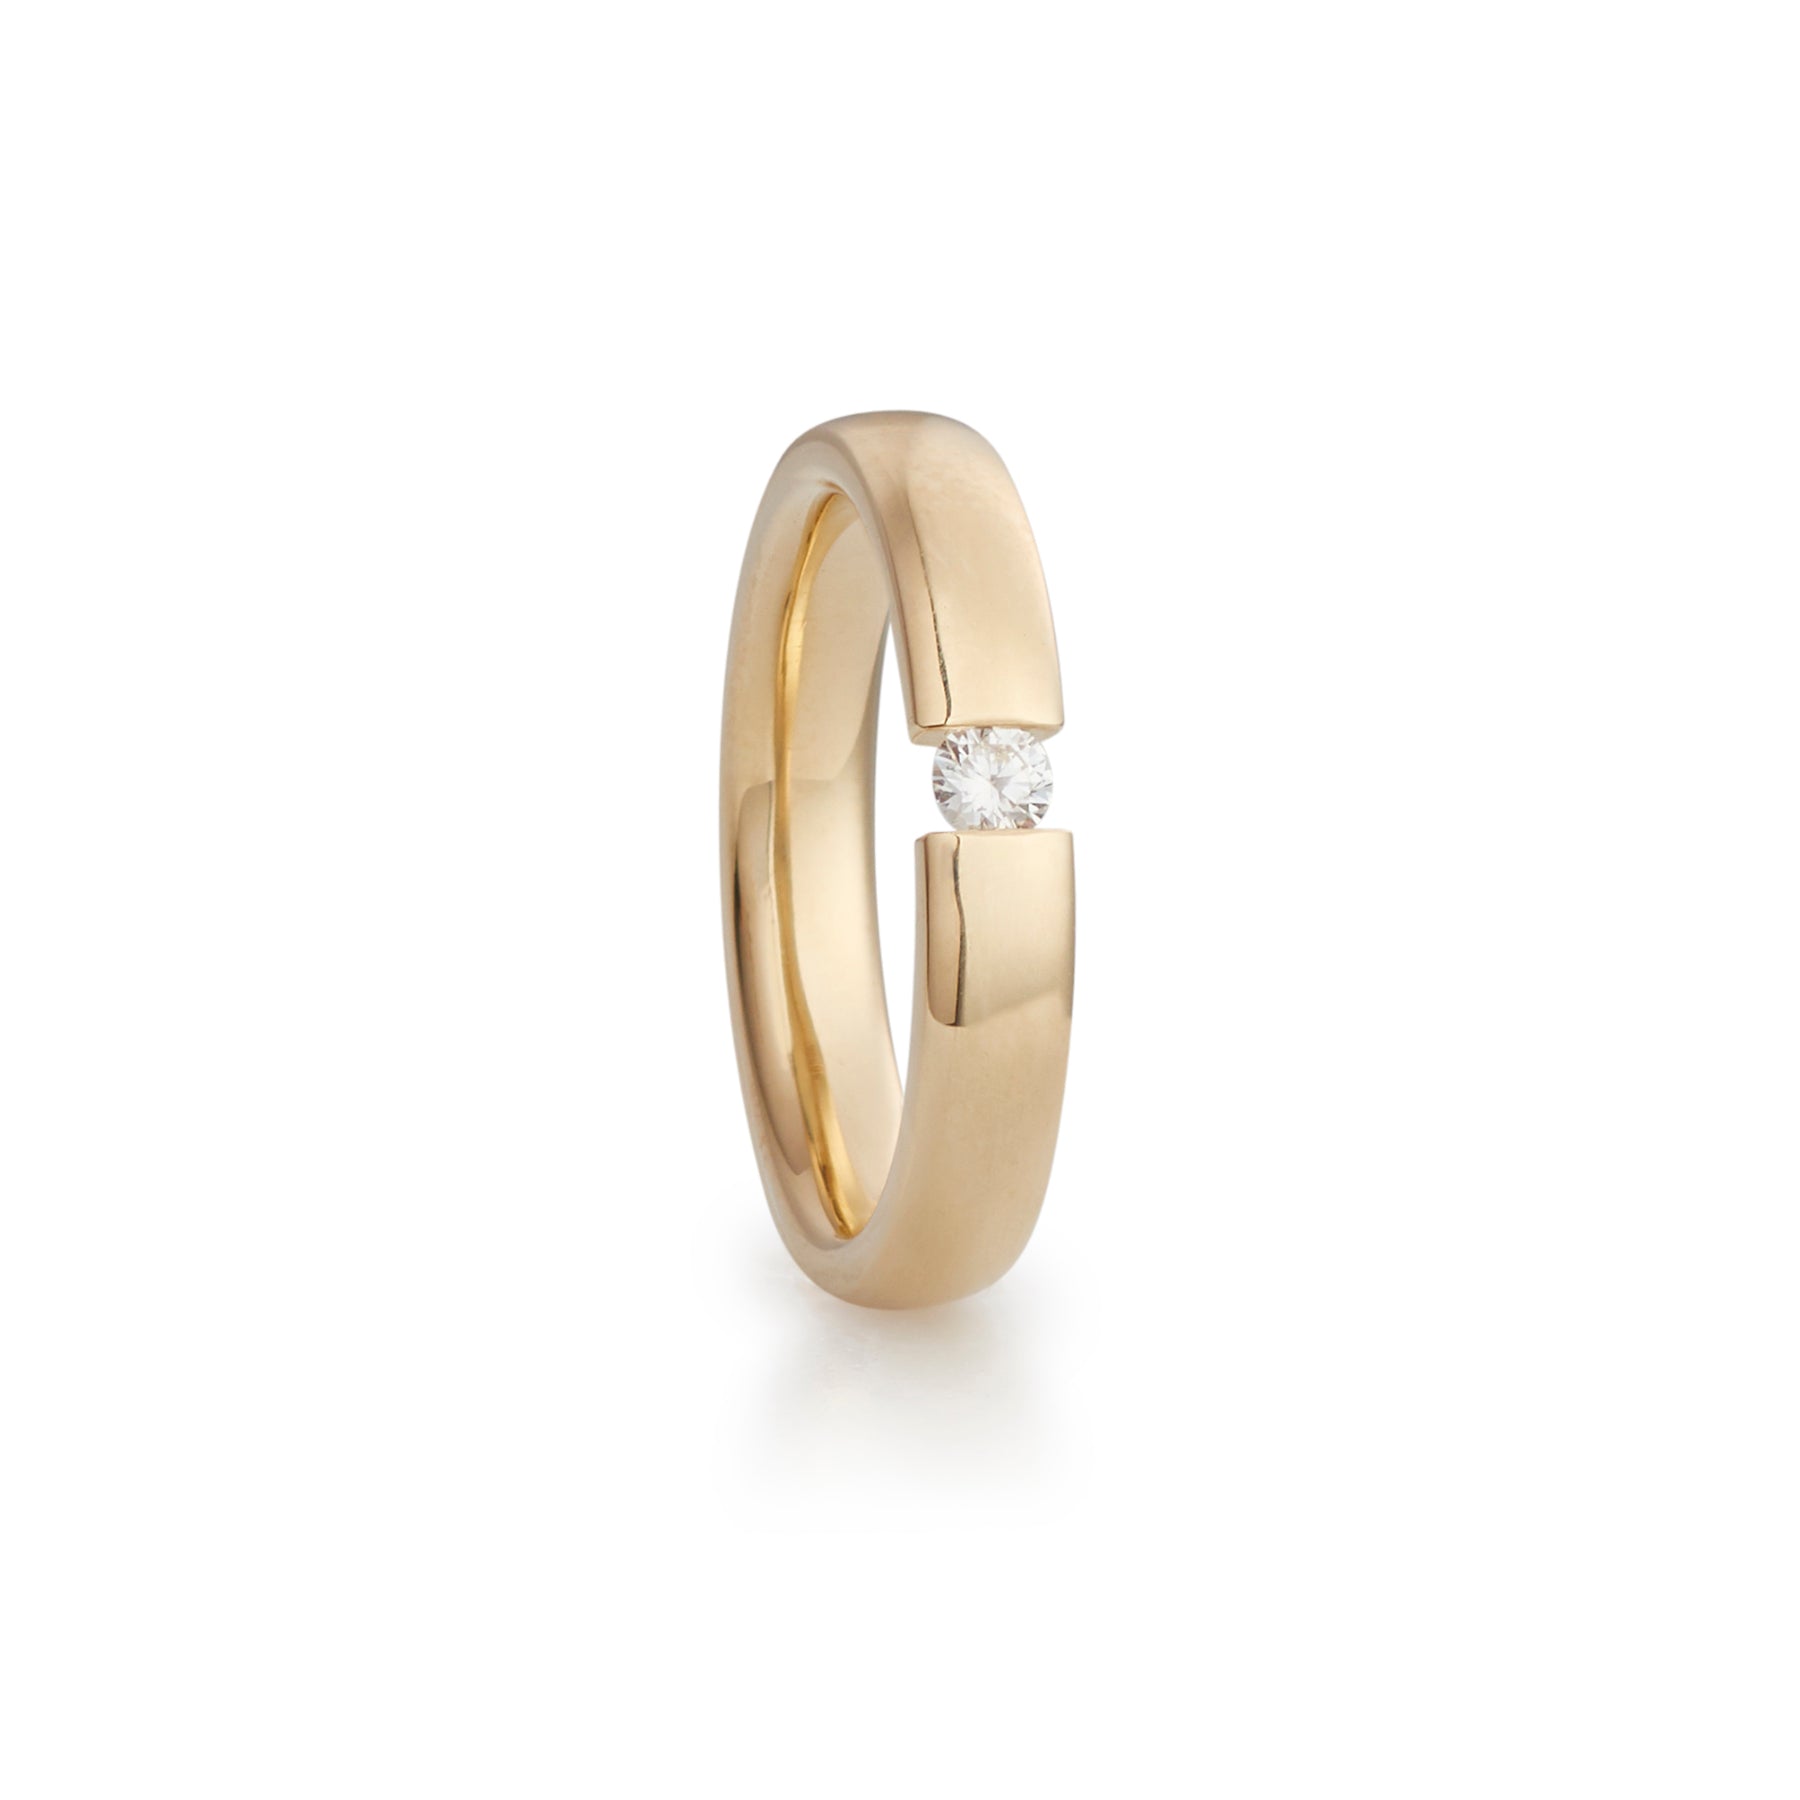 Buckle ring in yellow gold with diamond